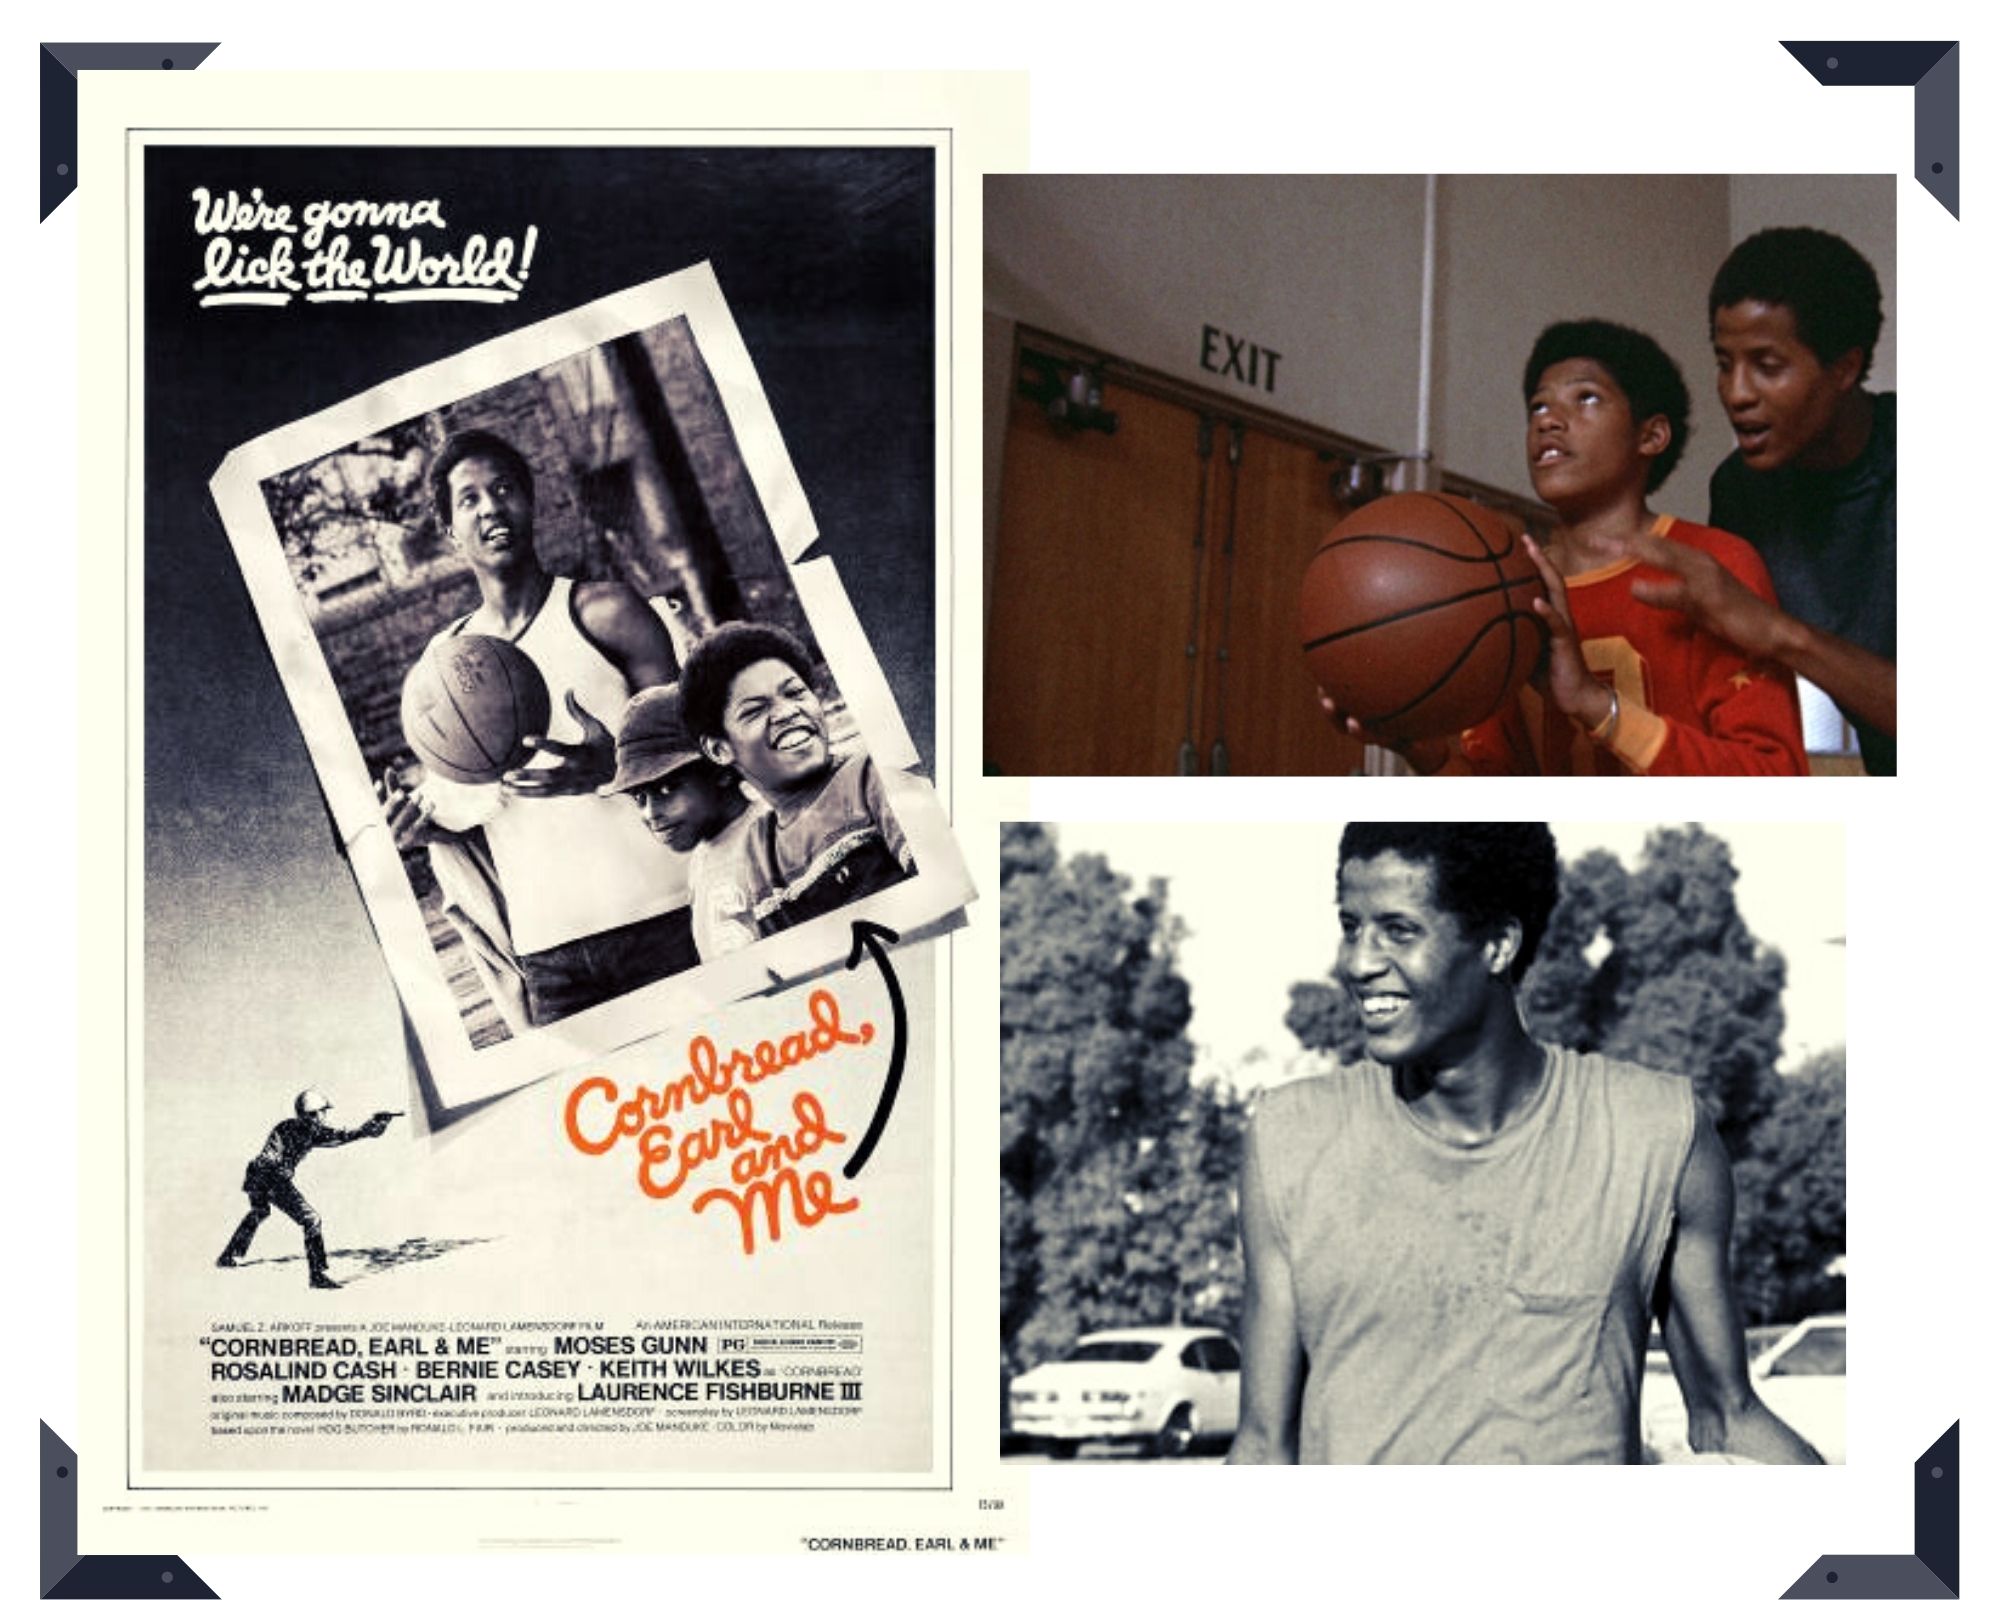 Basketball Legend And Hall Of Famer Jamaal Wilkes Talks About He Was Chosen For The Legendary Film “Cornbread, Earl And Me”